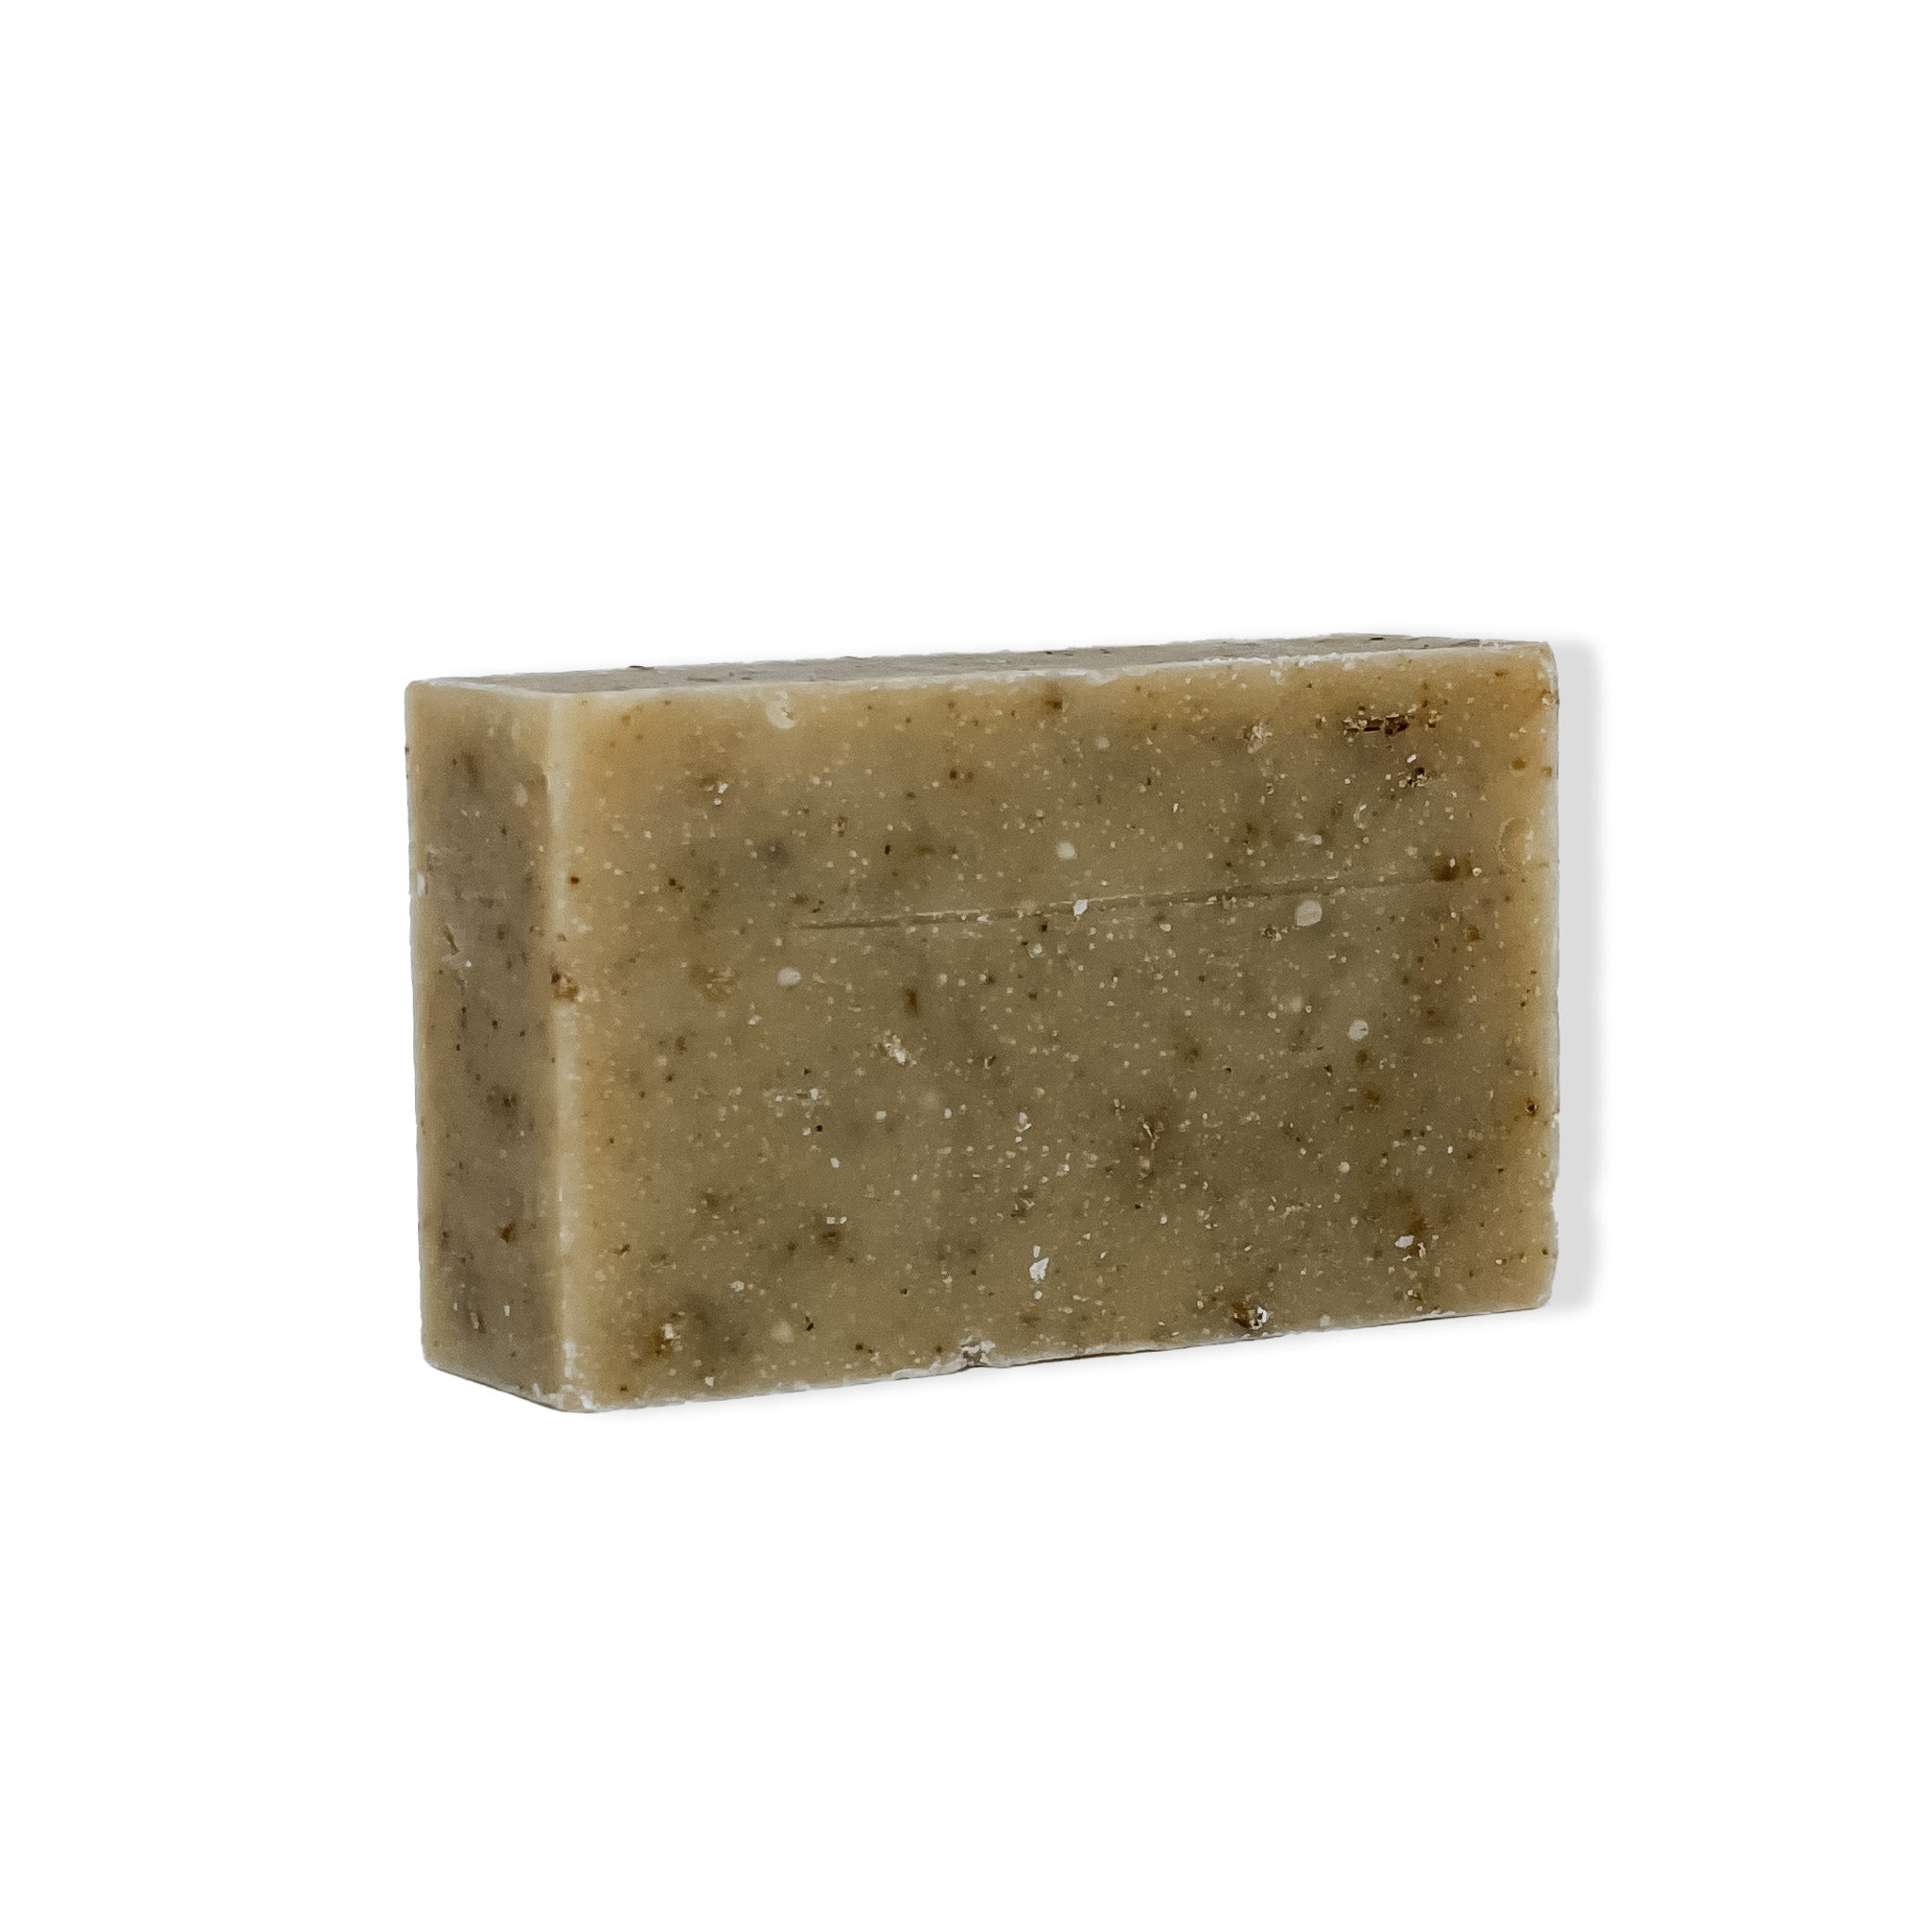 botanical-soap-oatmeal-spice-withSimplicity